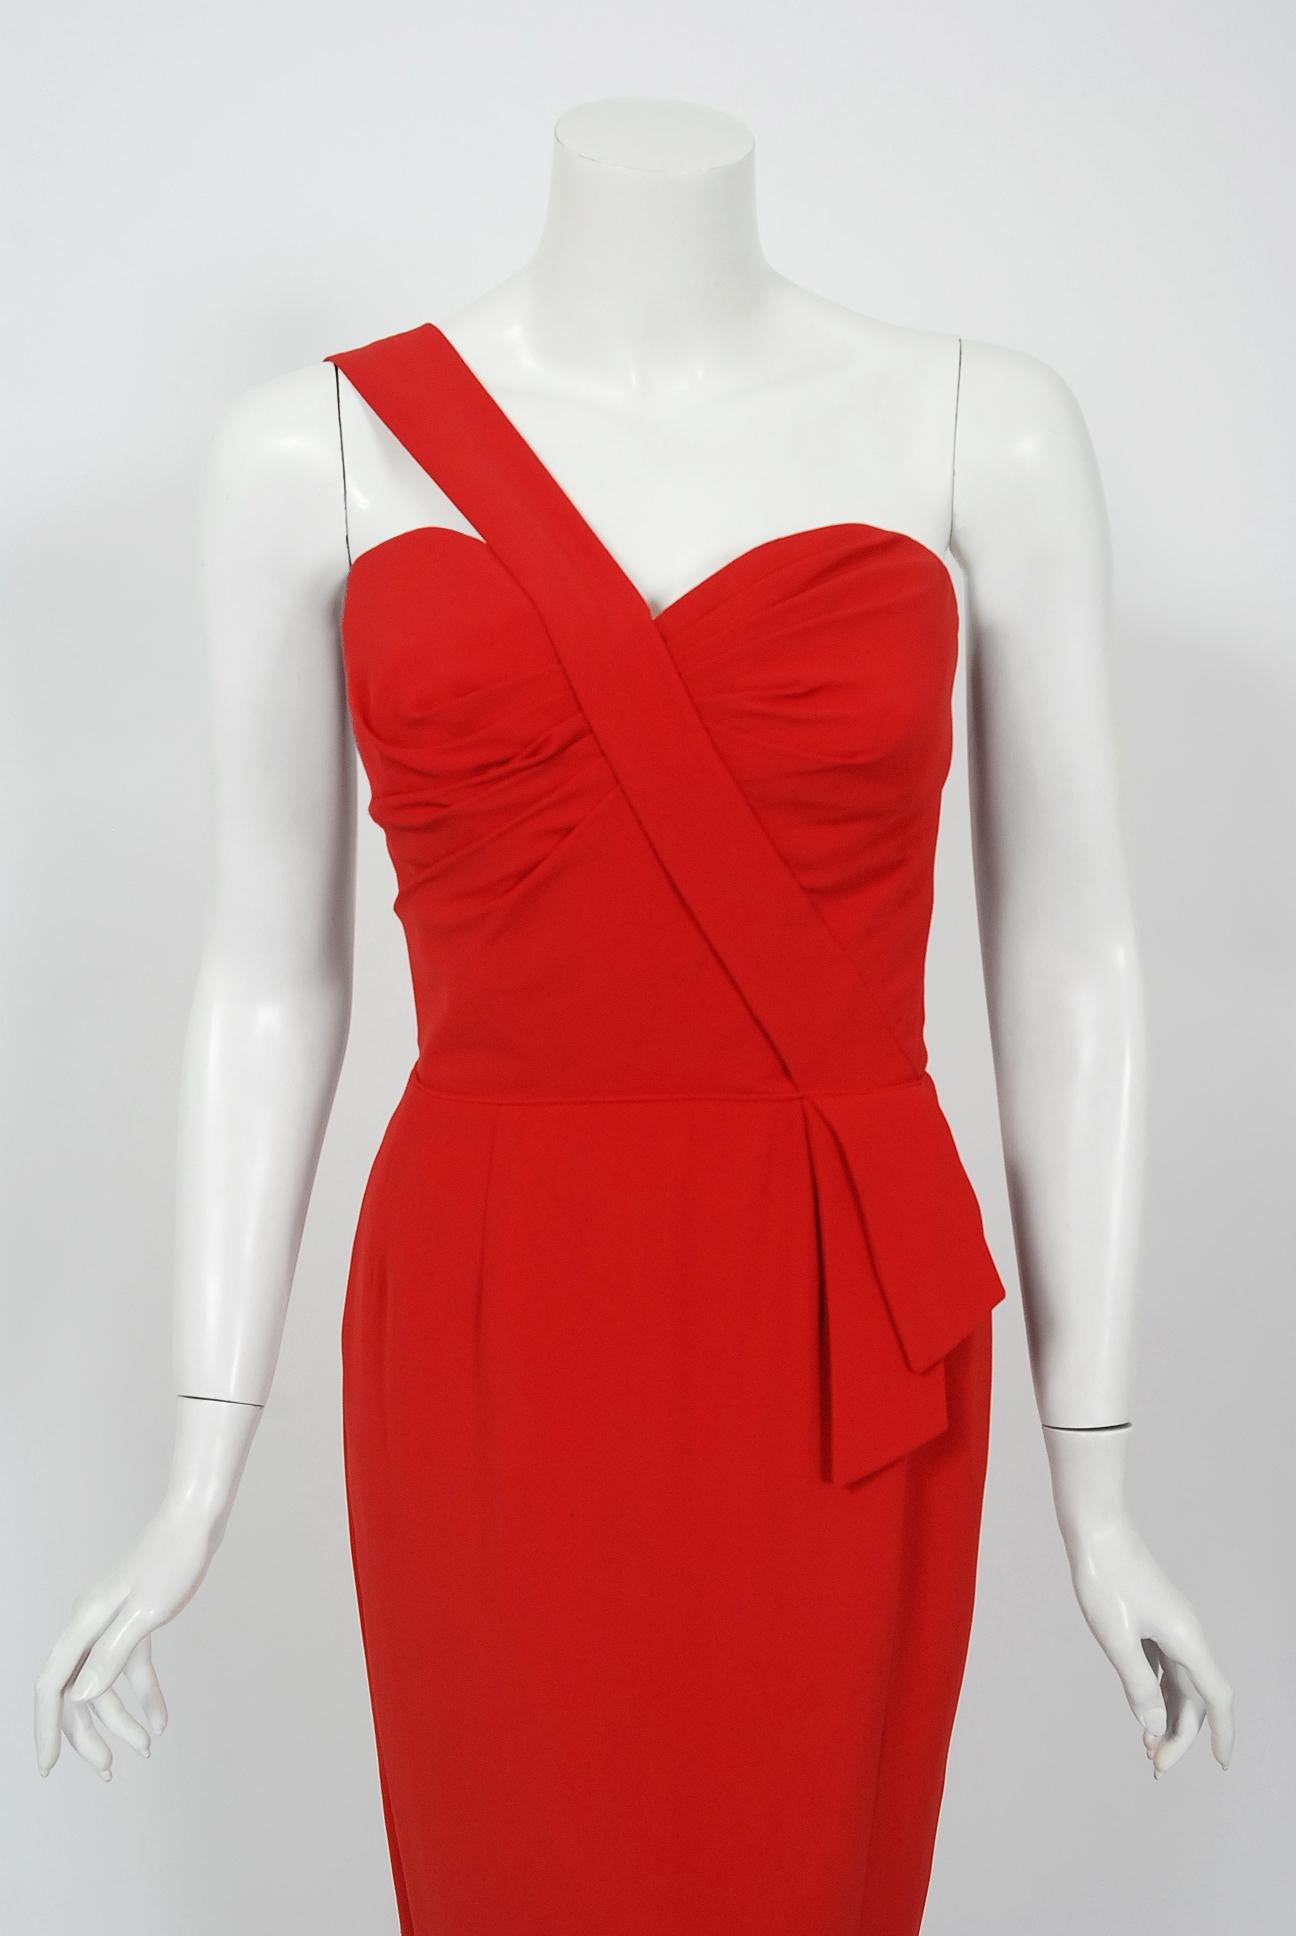 Exquisite late 1950's sculpted ruby-red rayon crepe hourglass gown by the famous 